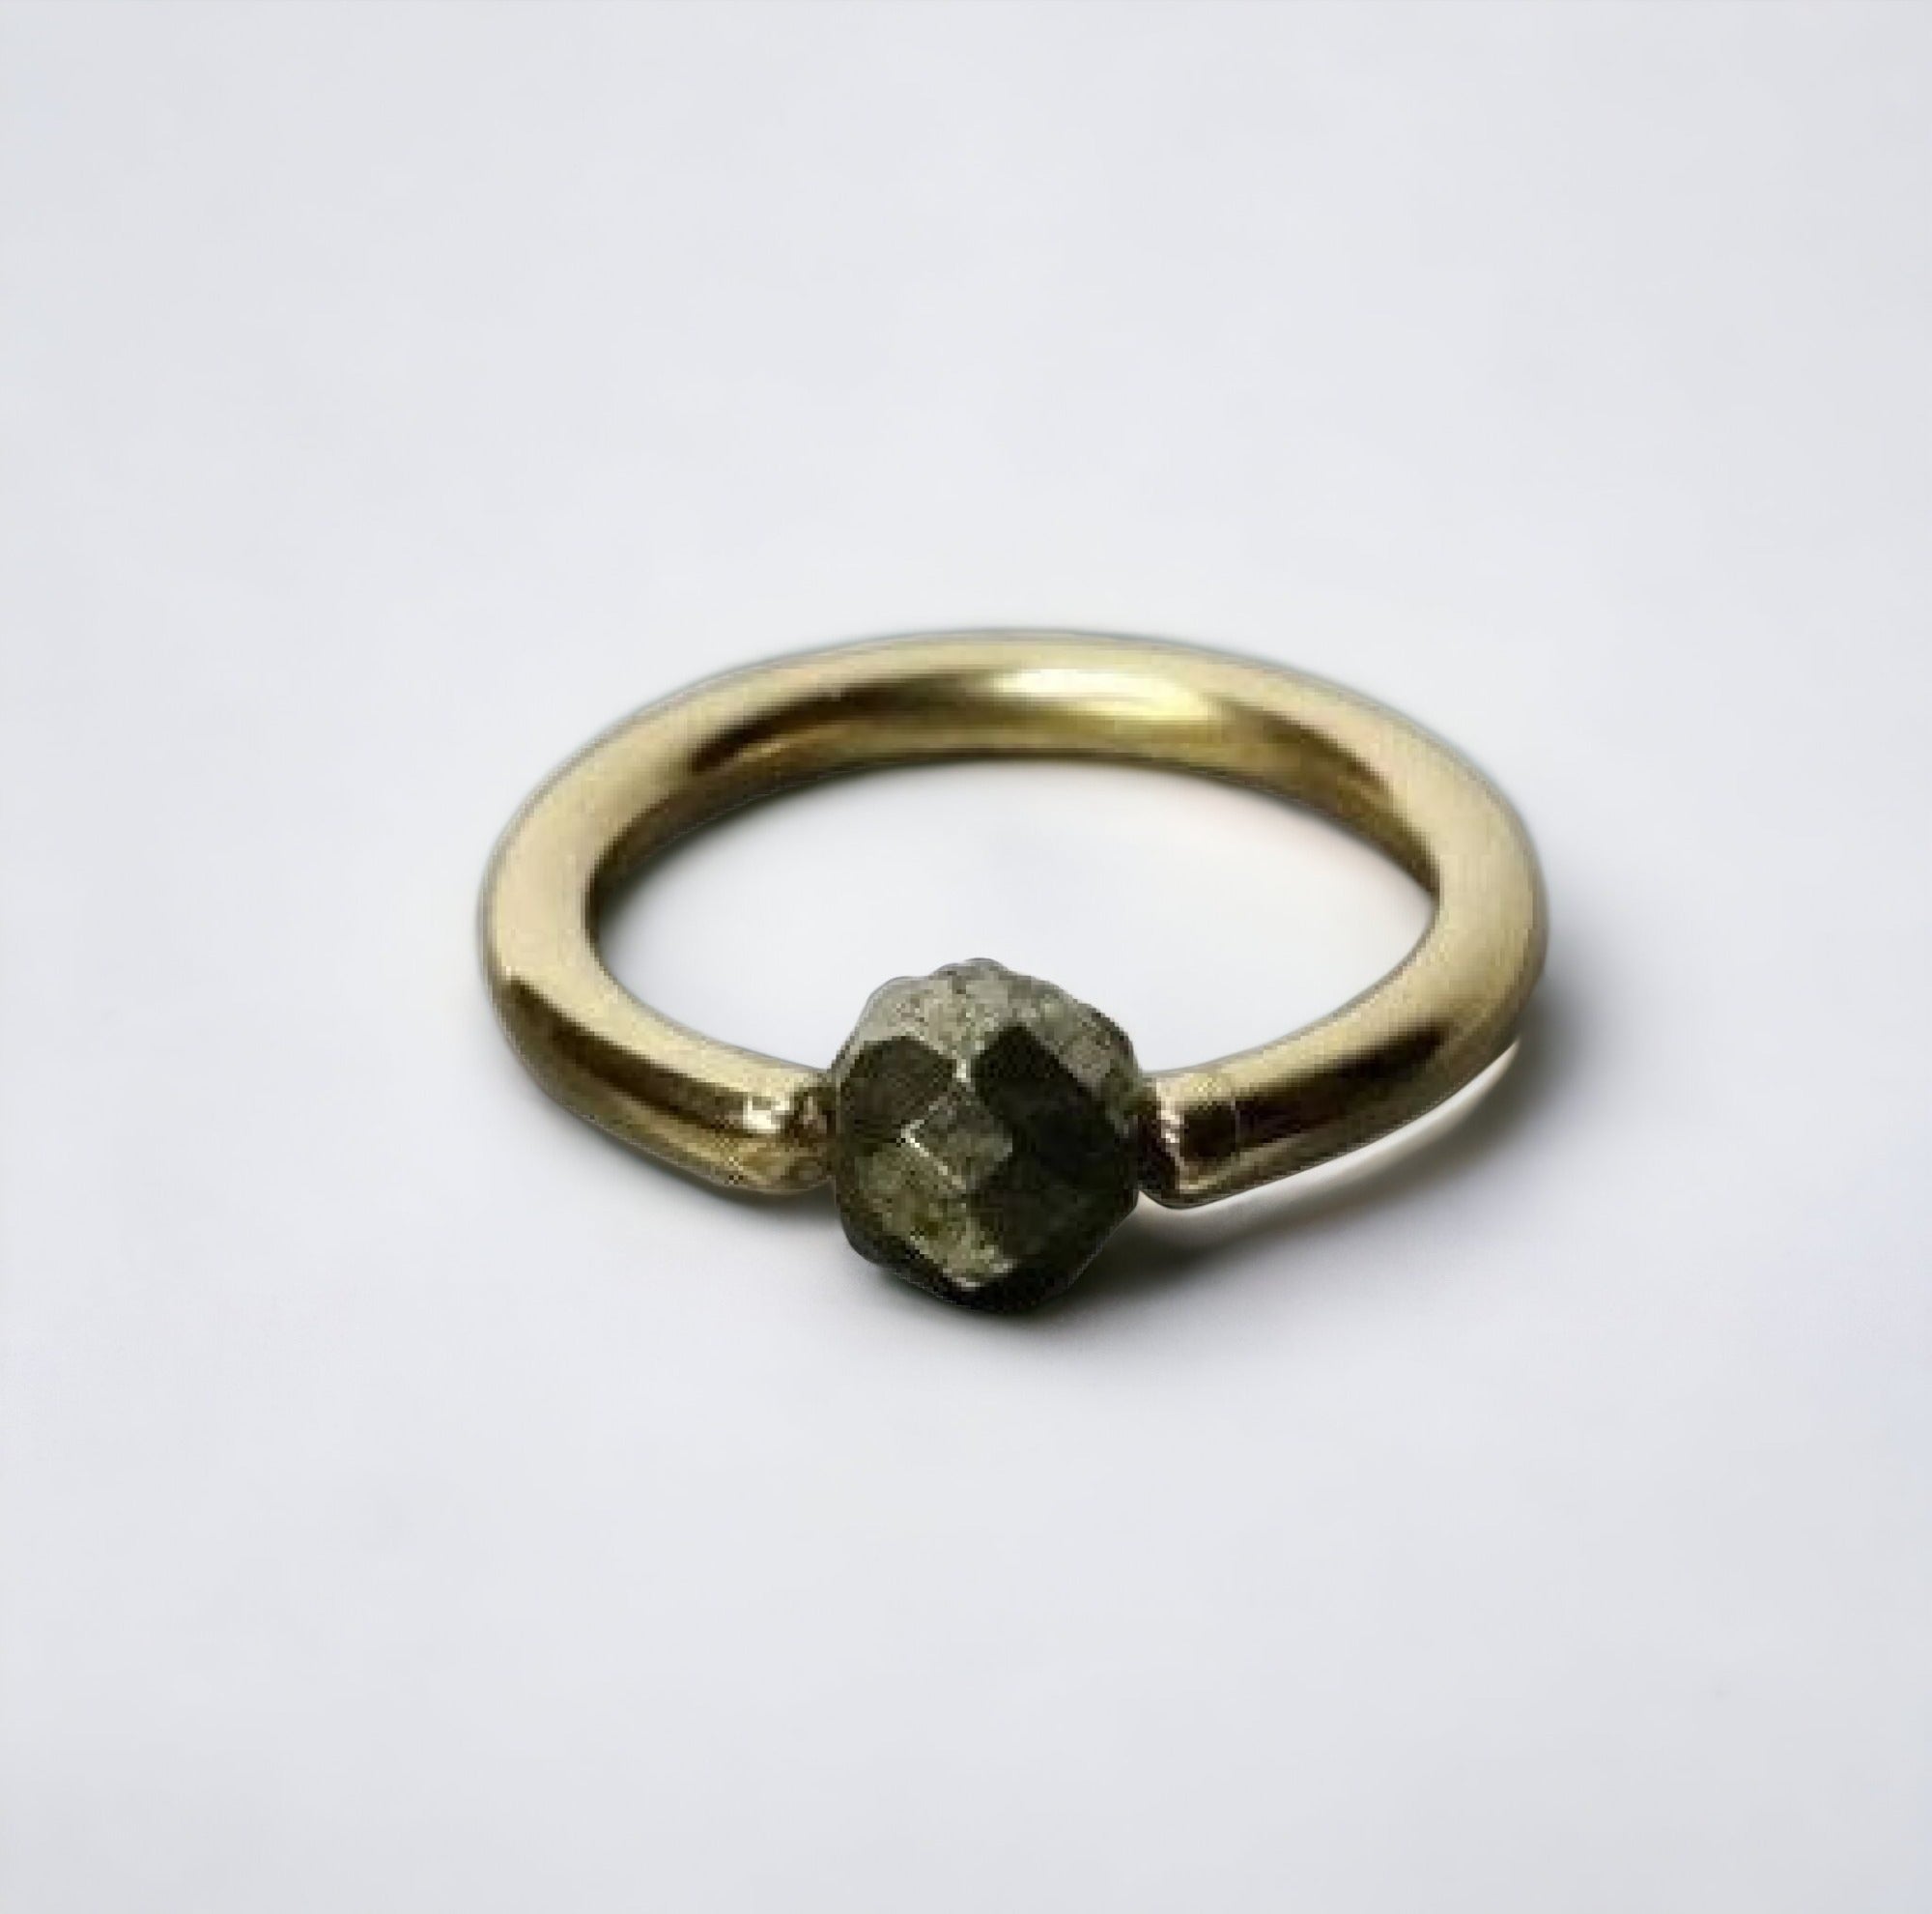 Pyrite Faceted Captive Bead Ring - 16 ga Hoop - 14k Gold (Y, W, or R), Sterling Silver, or Platinum